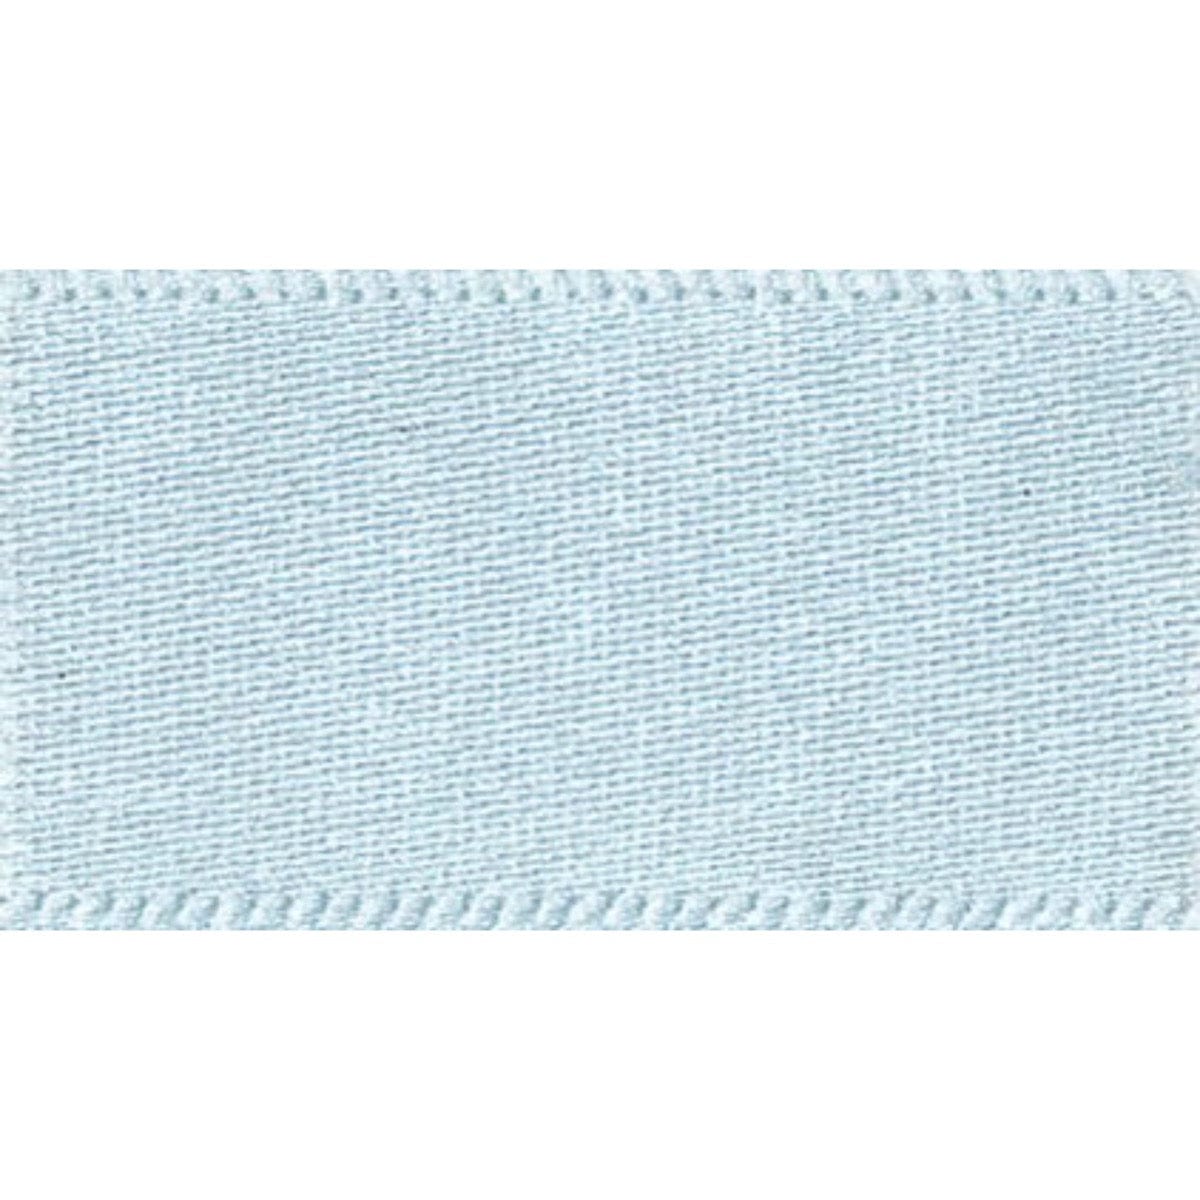 Double Faced Satin Ribbon Sky Blue: 7mm wide. Price per metre.